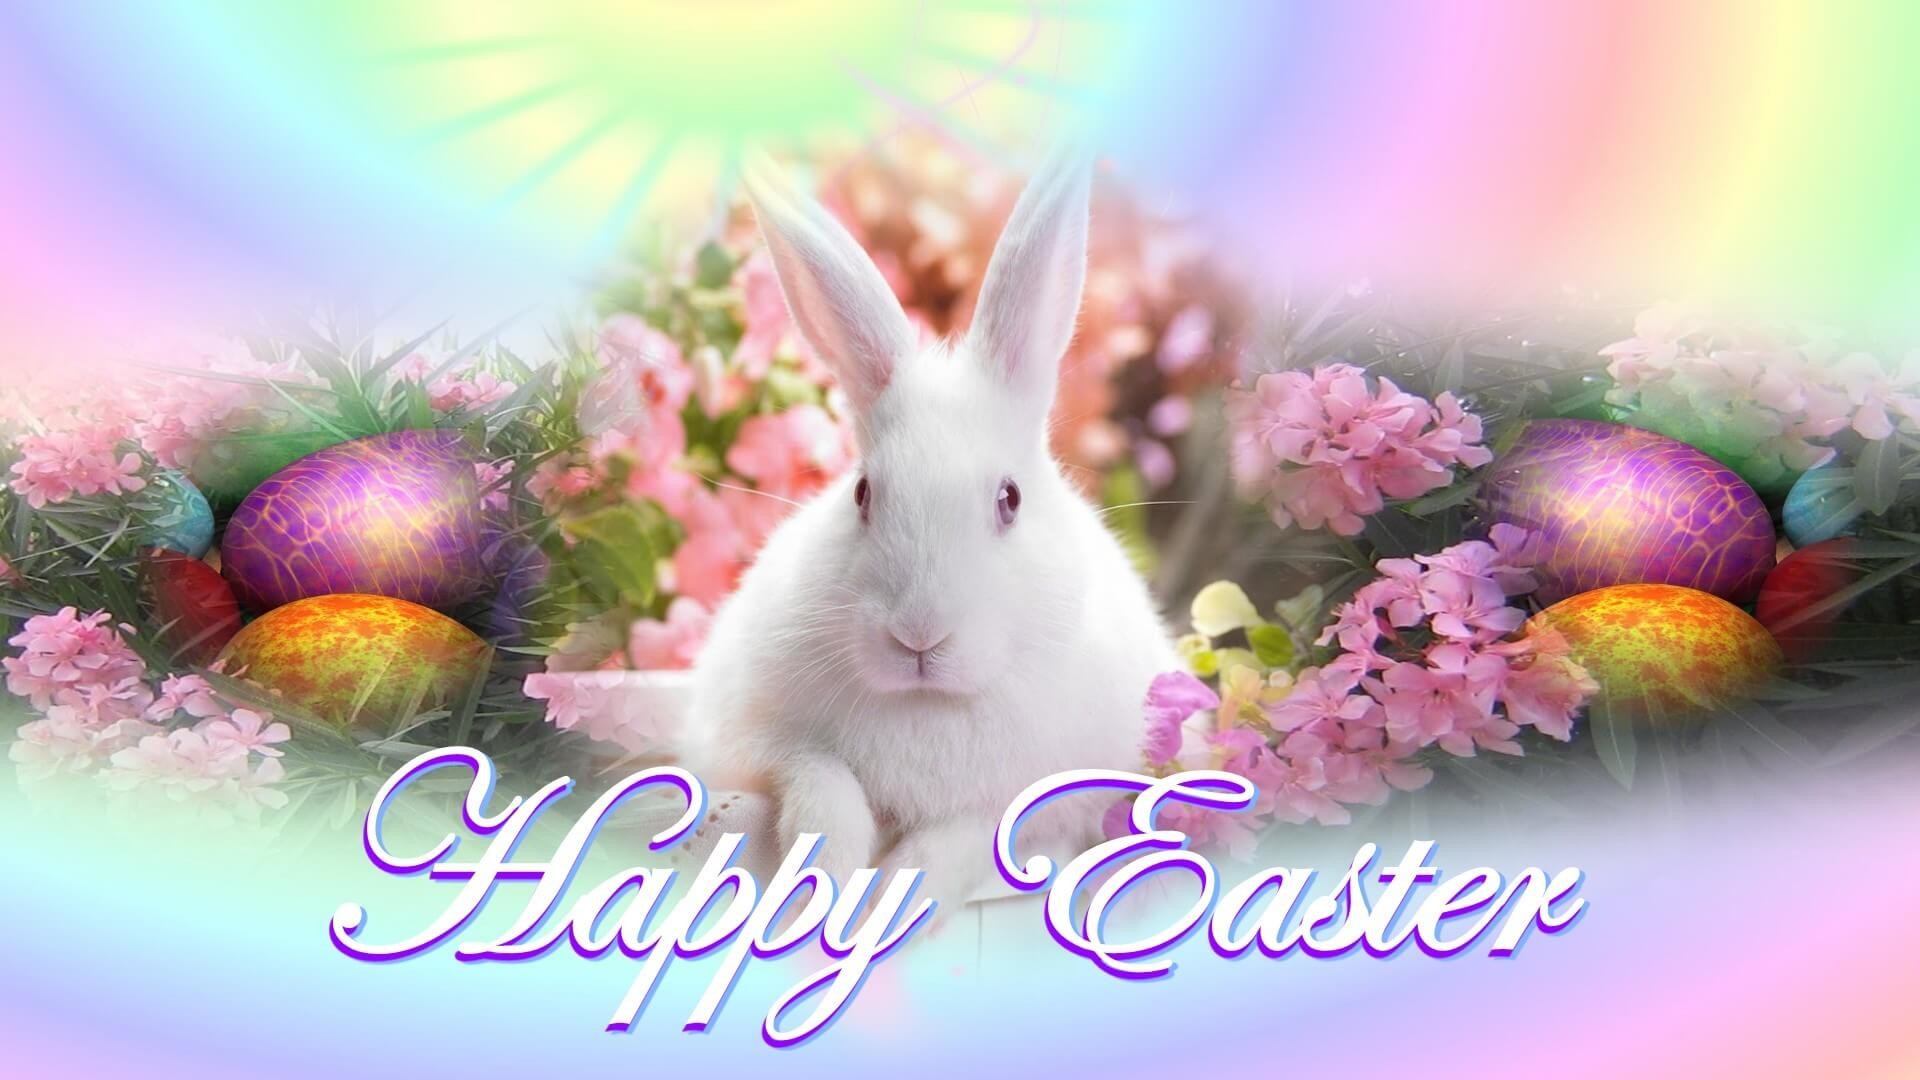 1920x1080 cute white rabbit bunny easter wishes hd background